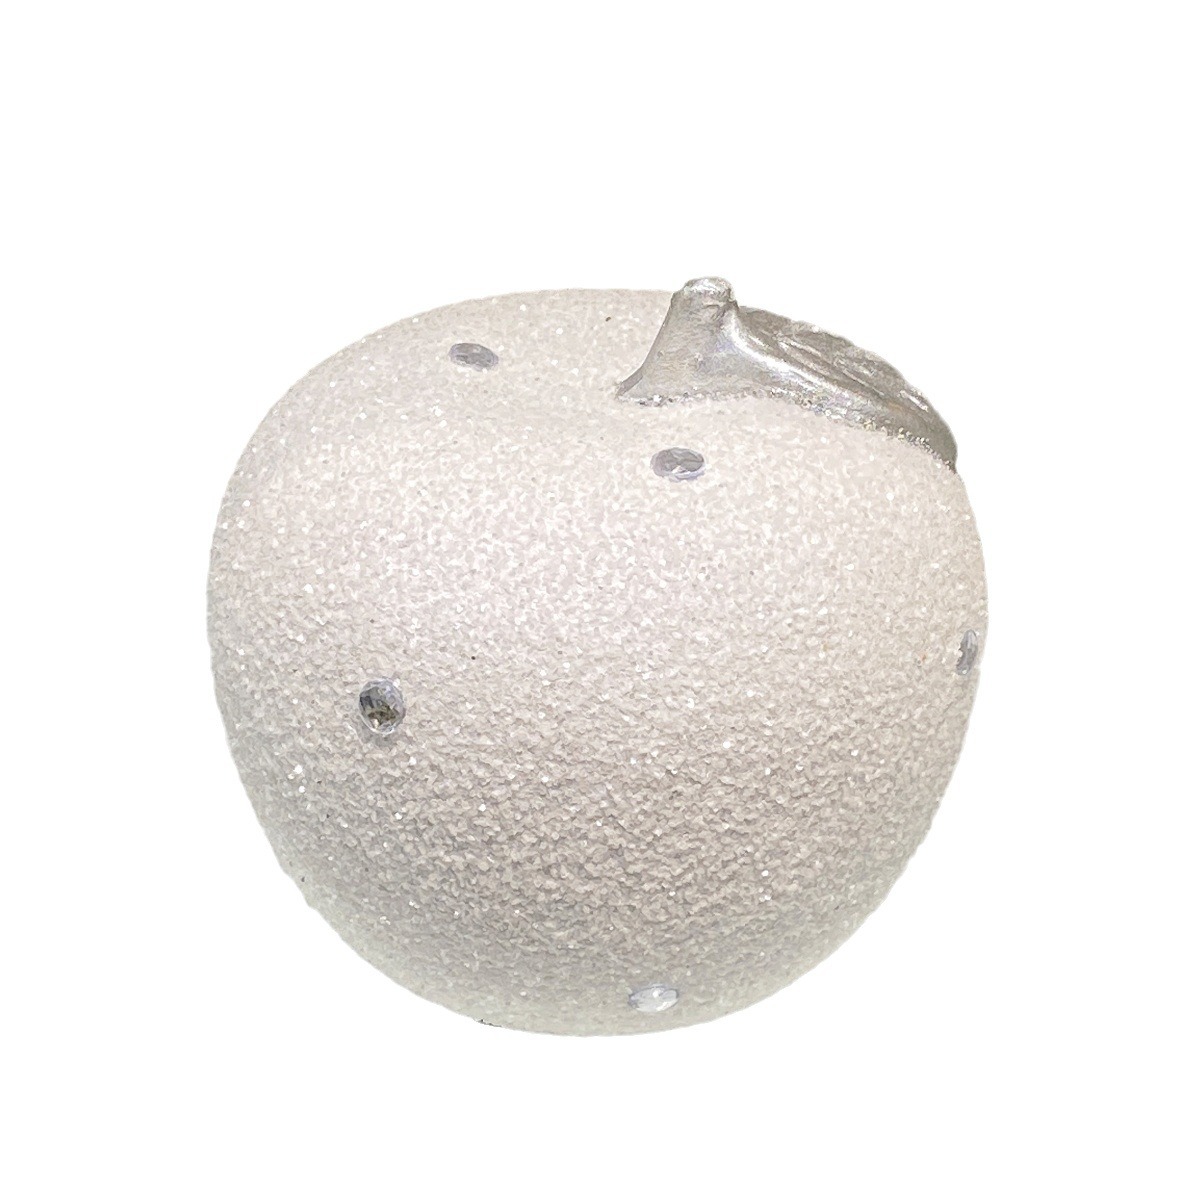 Customized White Sand Fruit Apple Decoration Love Candy Party Layout Wedding Silver Patch Glass Ball